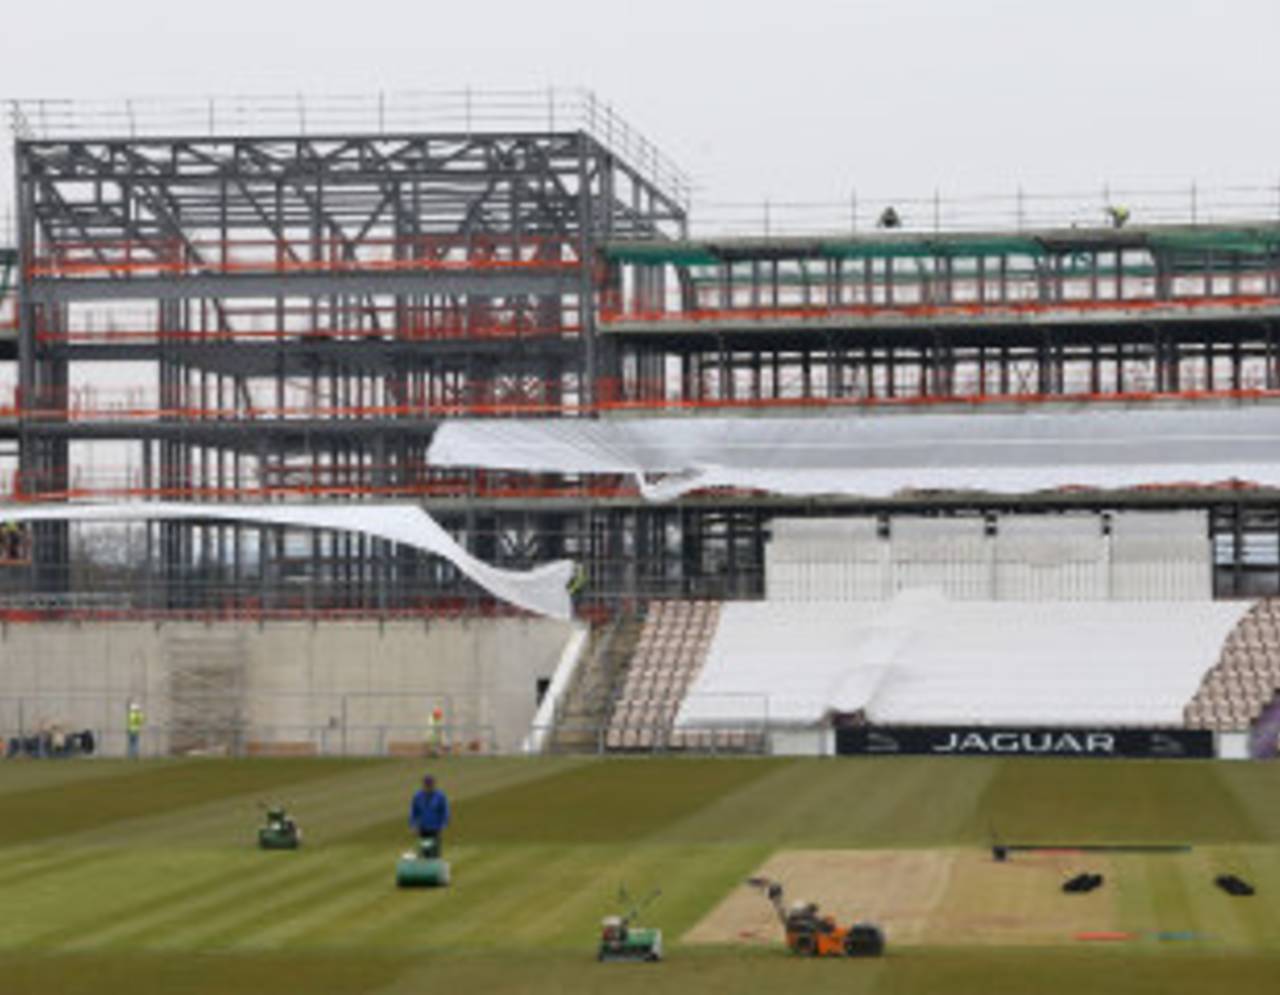 Hampshire's Ageas Bowl ground, where a Hilton hotel is under construction, is owned by Eastleigh Borough Council&nbsp;&nbsp;&bull;&nbsp;&nbsp;Getty Images